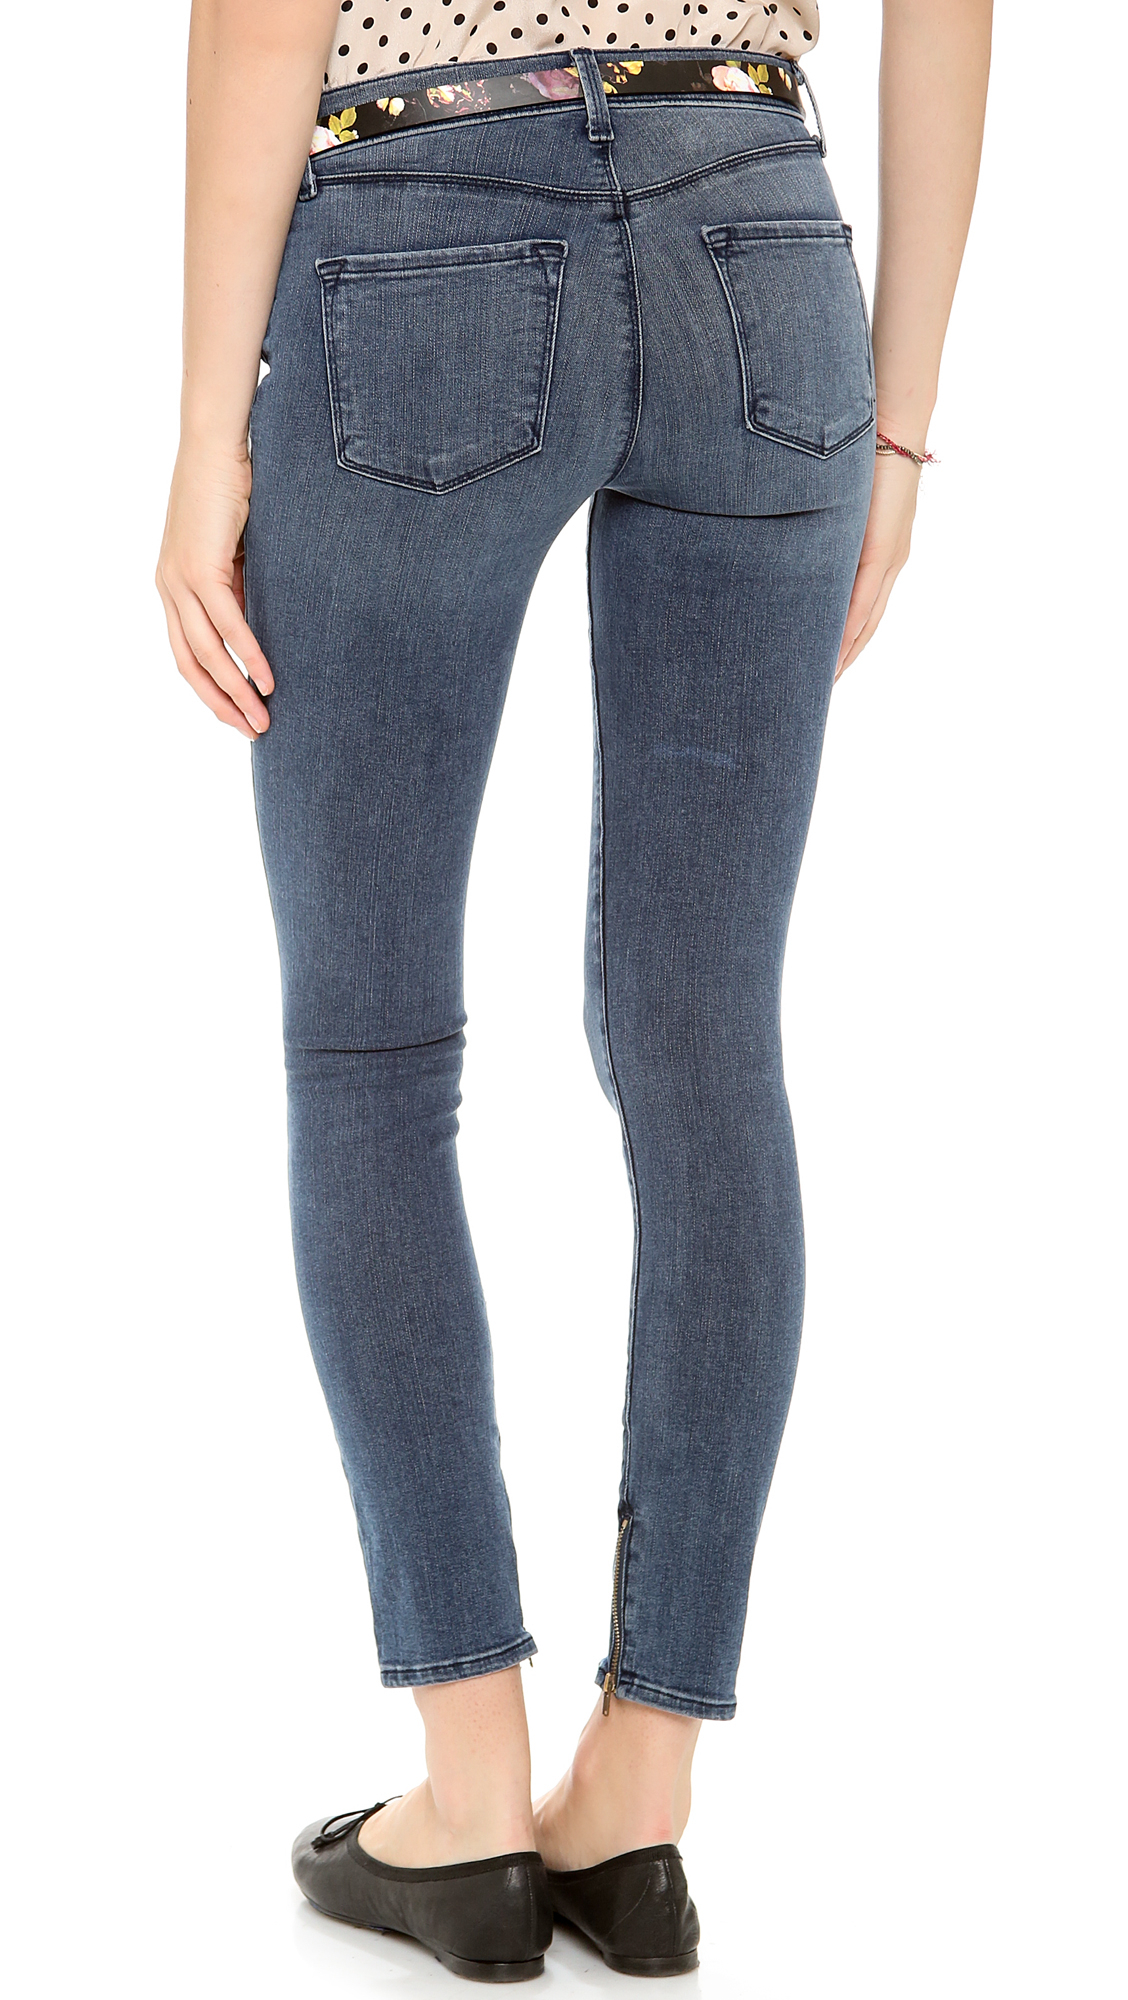 Lyst - J Brand Maria Cropped Jeans in Blue